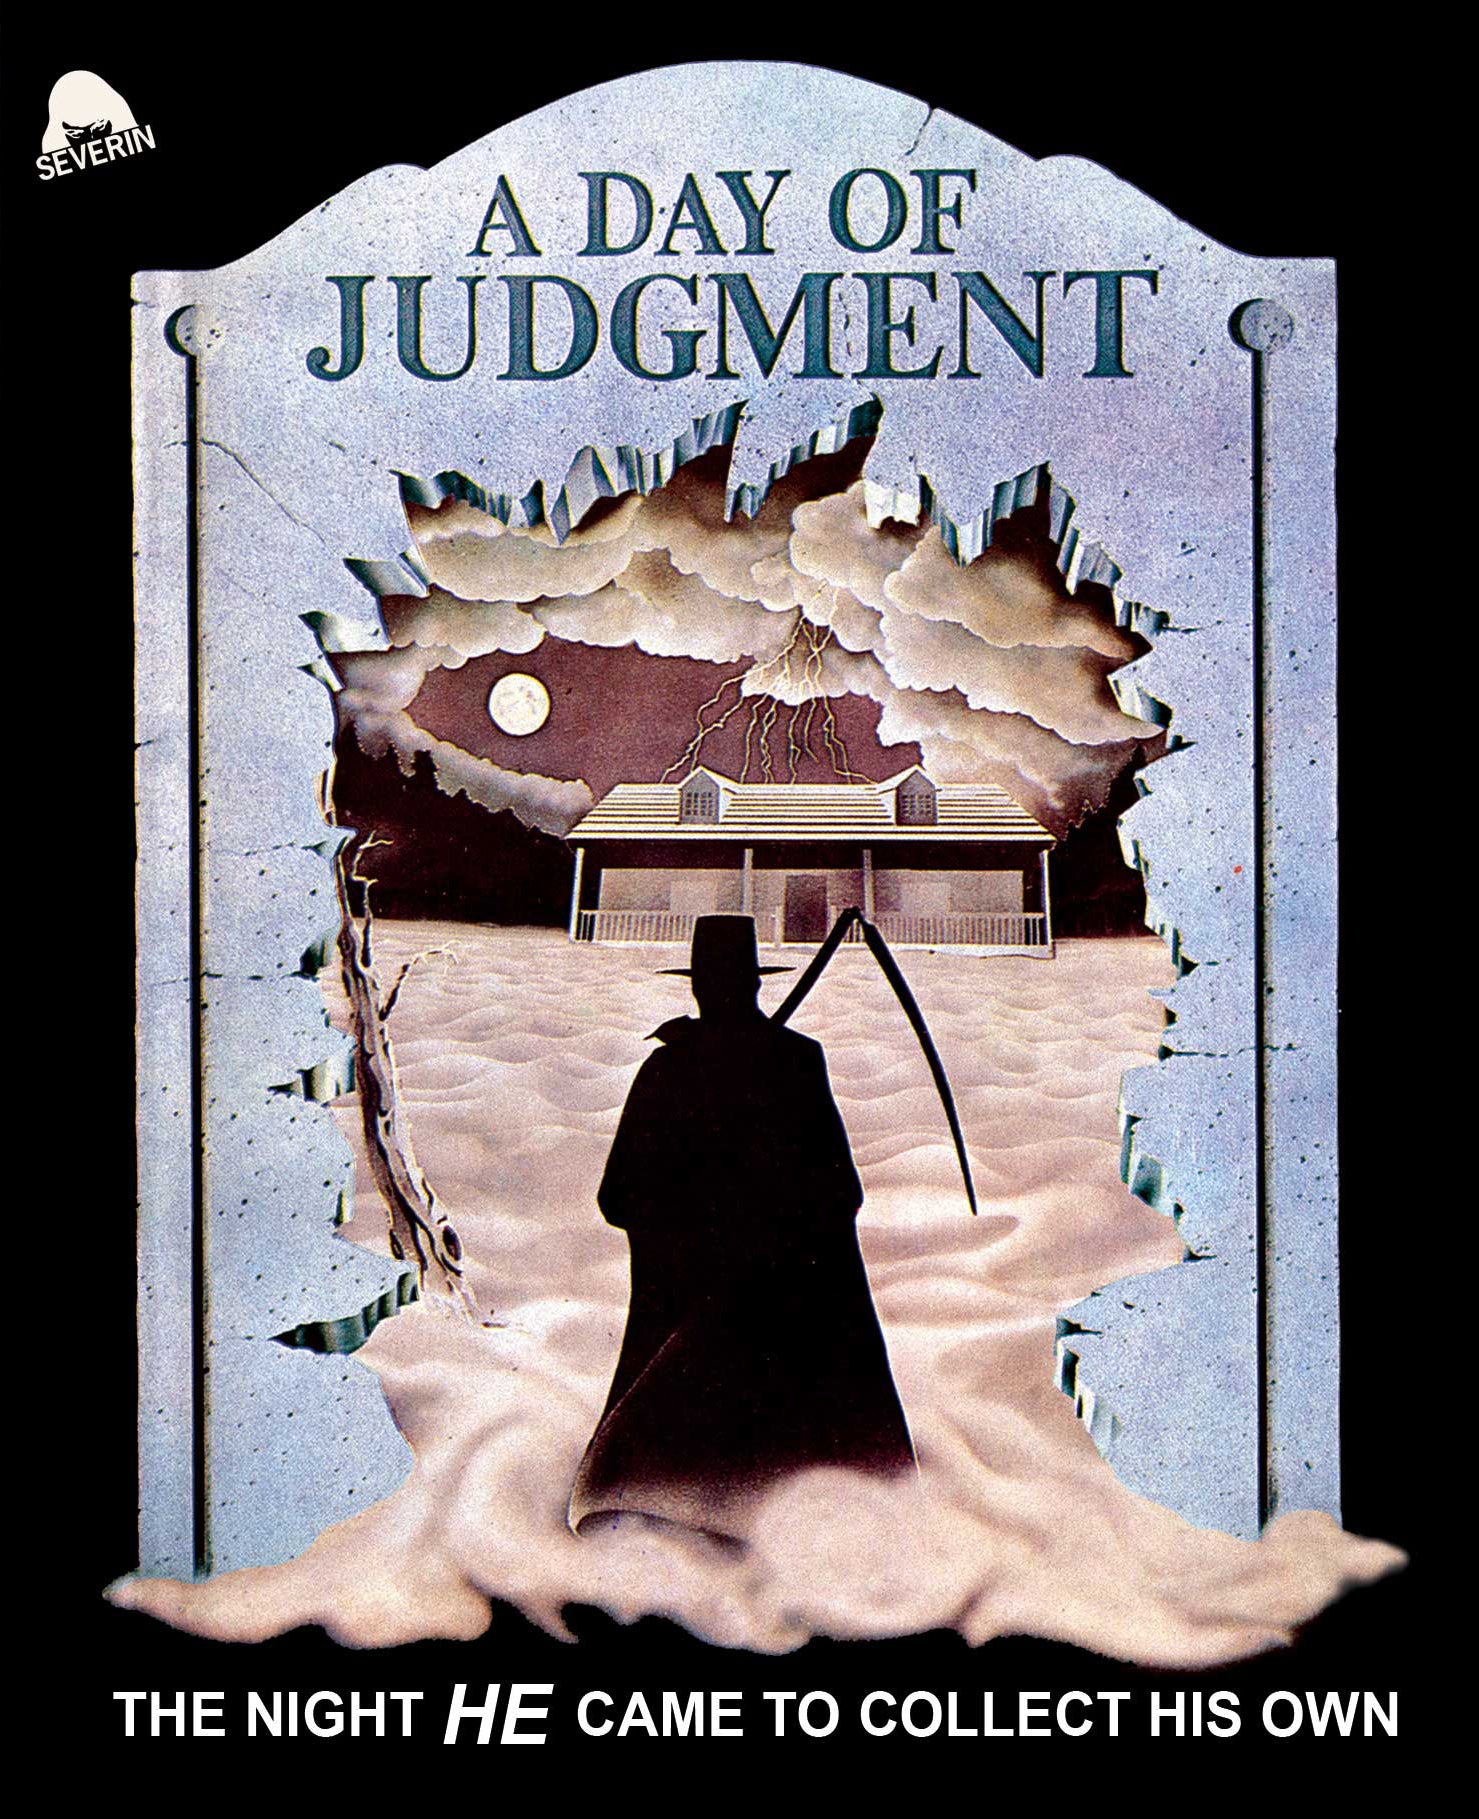 A DAY OF JUDGMENT DVD